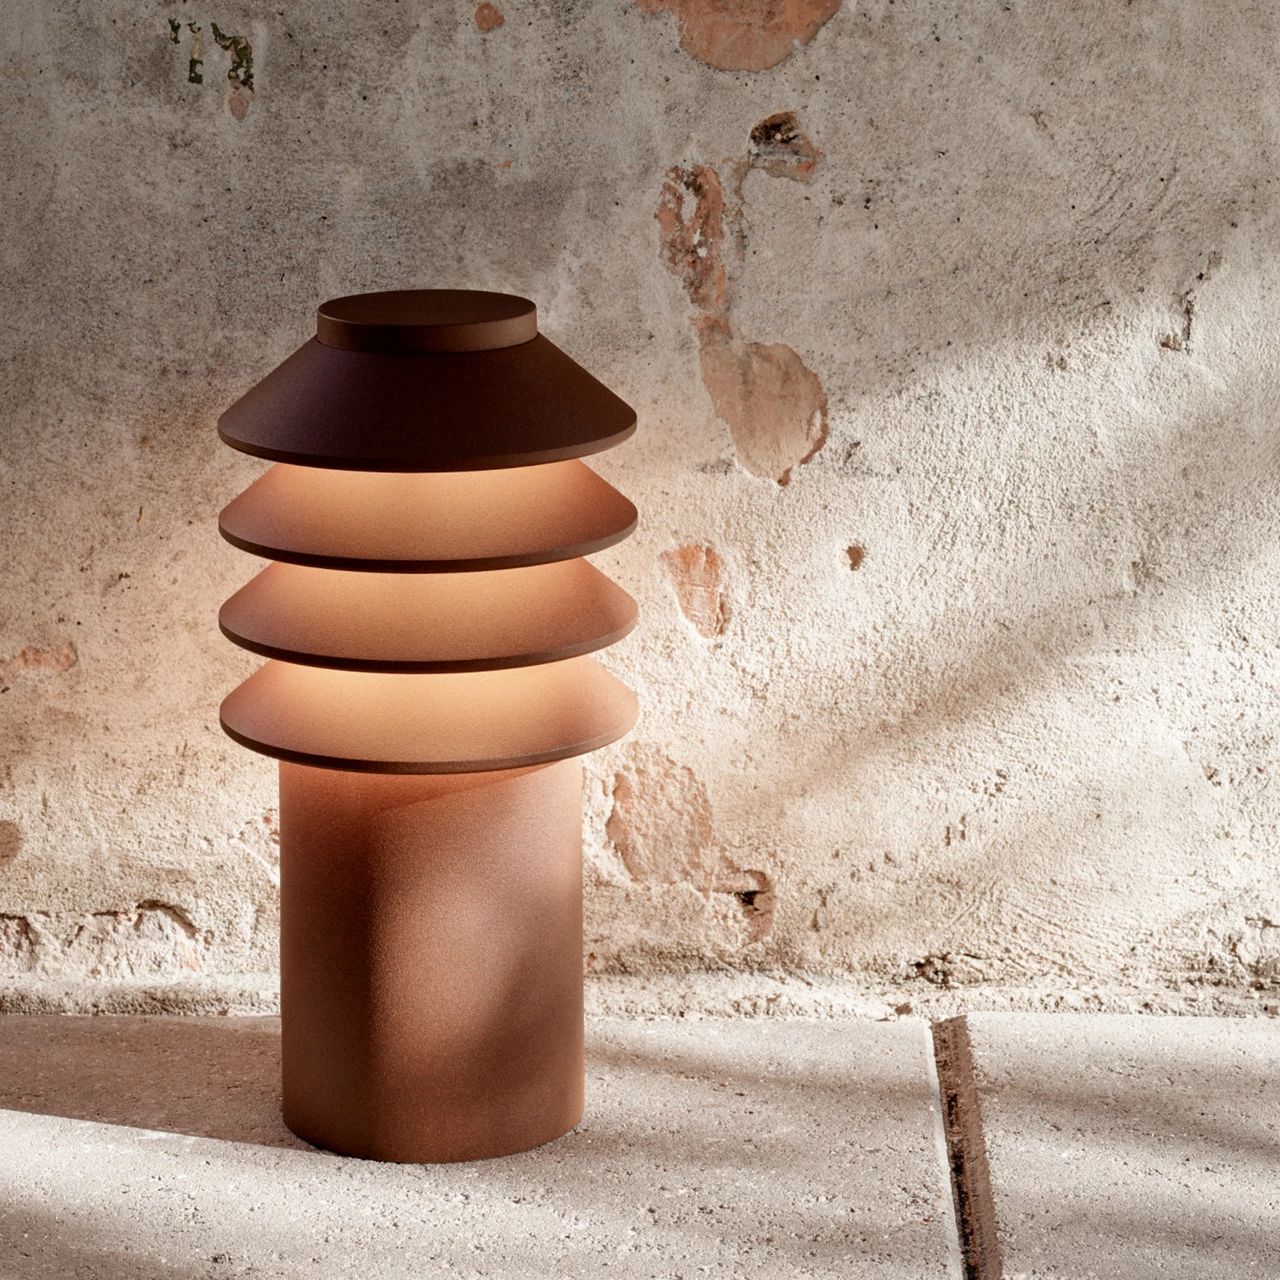 Louis Poulsen Bysted Garden Bollard Led 2700 K 14 W Spike Without Adaptor With Connector Short, Corten